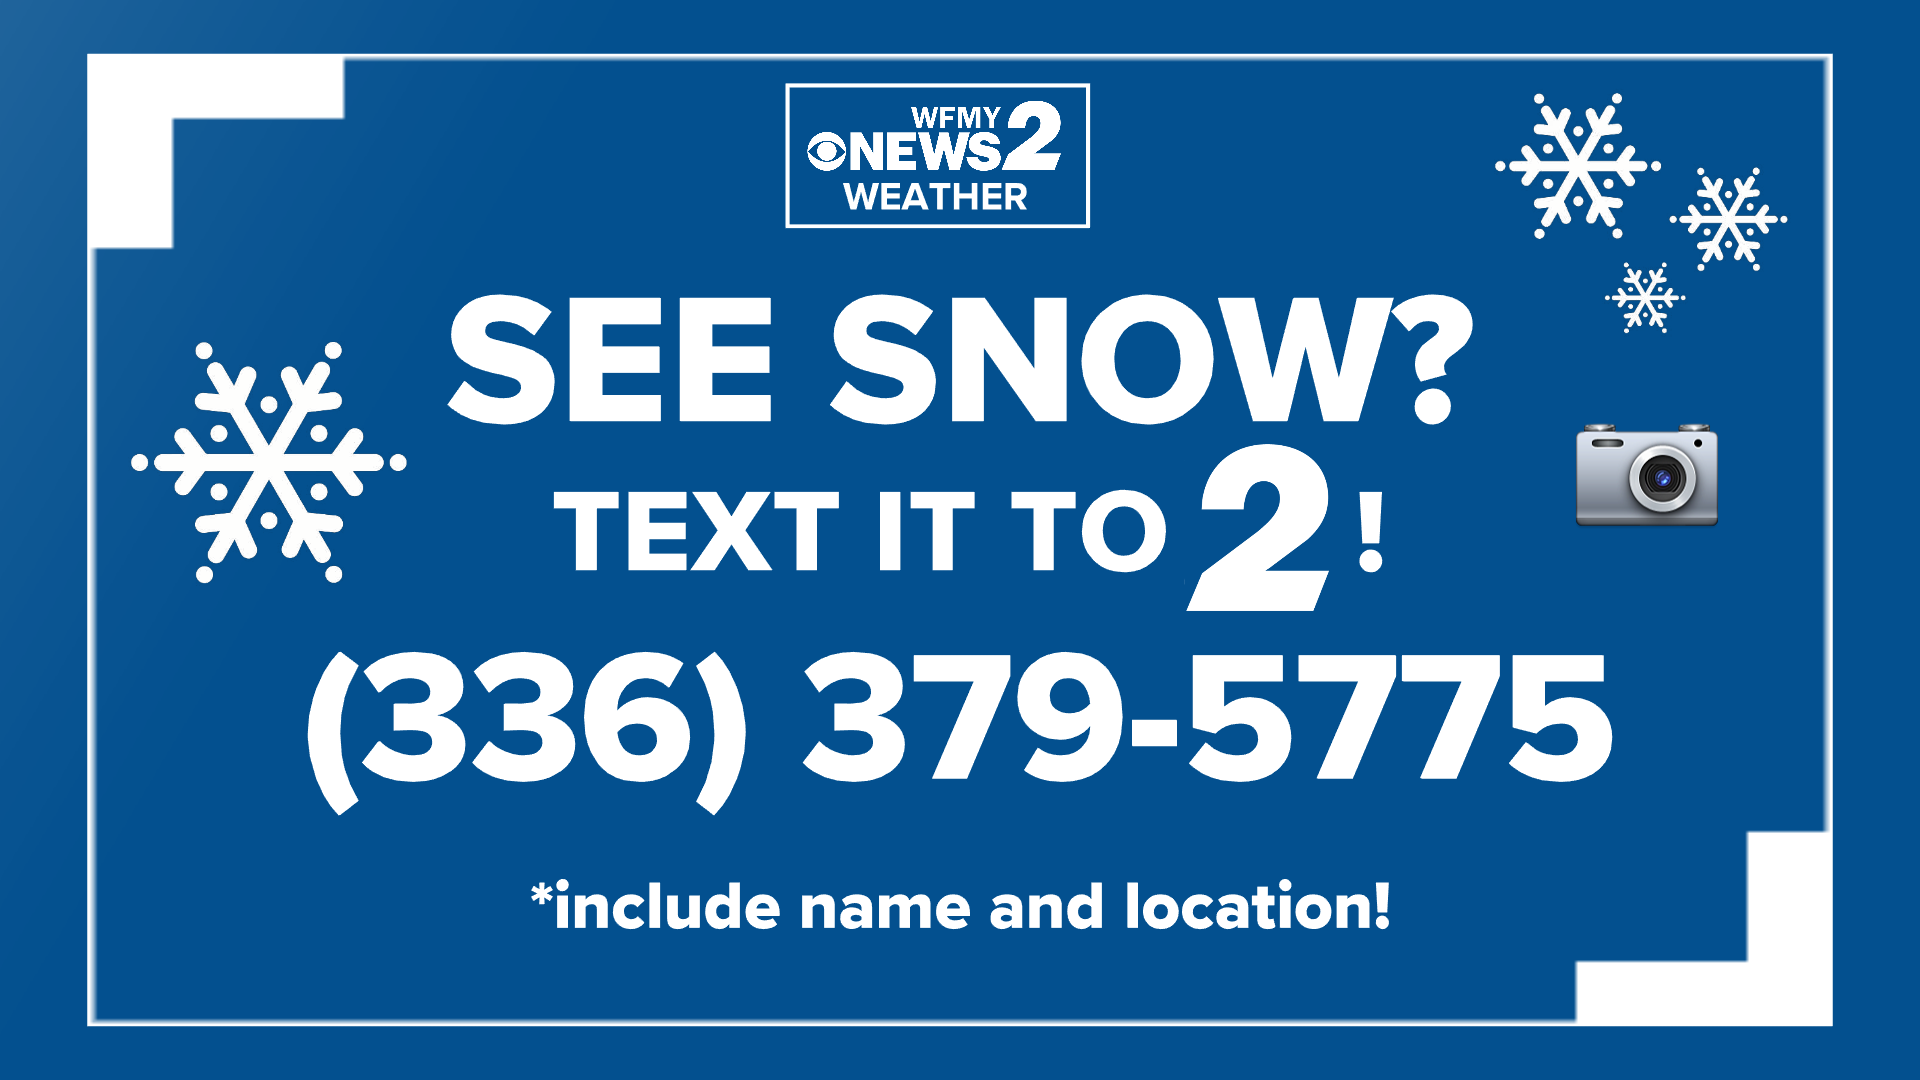 See snow? Text it to us, along with your name and a brief description. The number is (336) 379-5775.